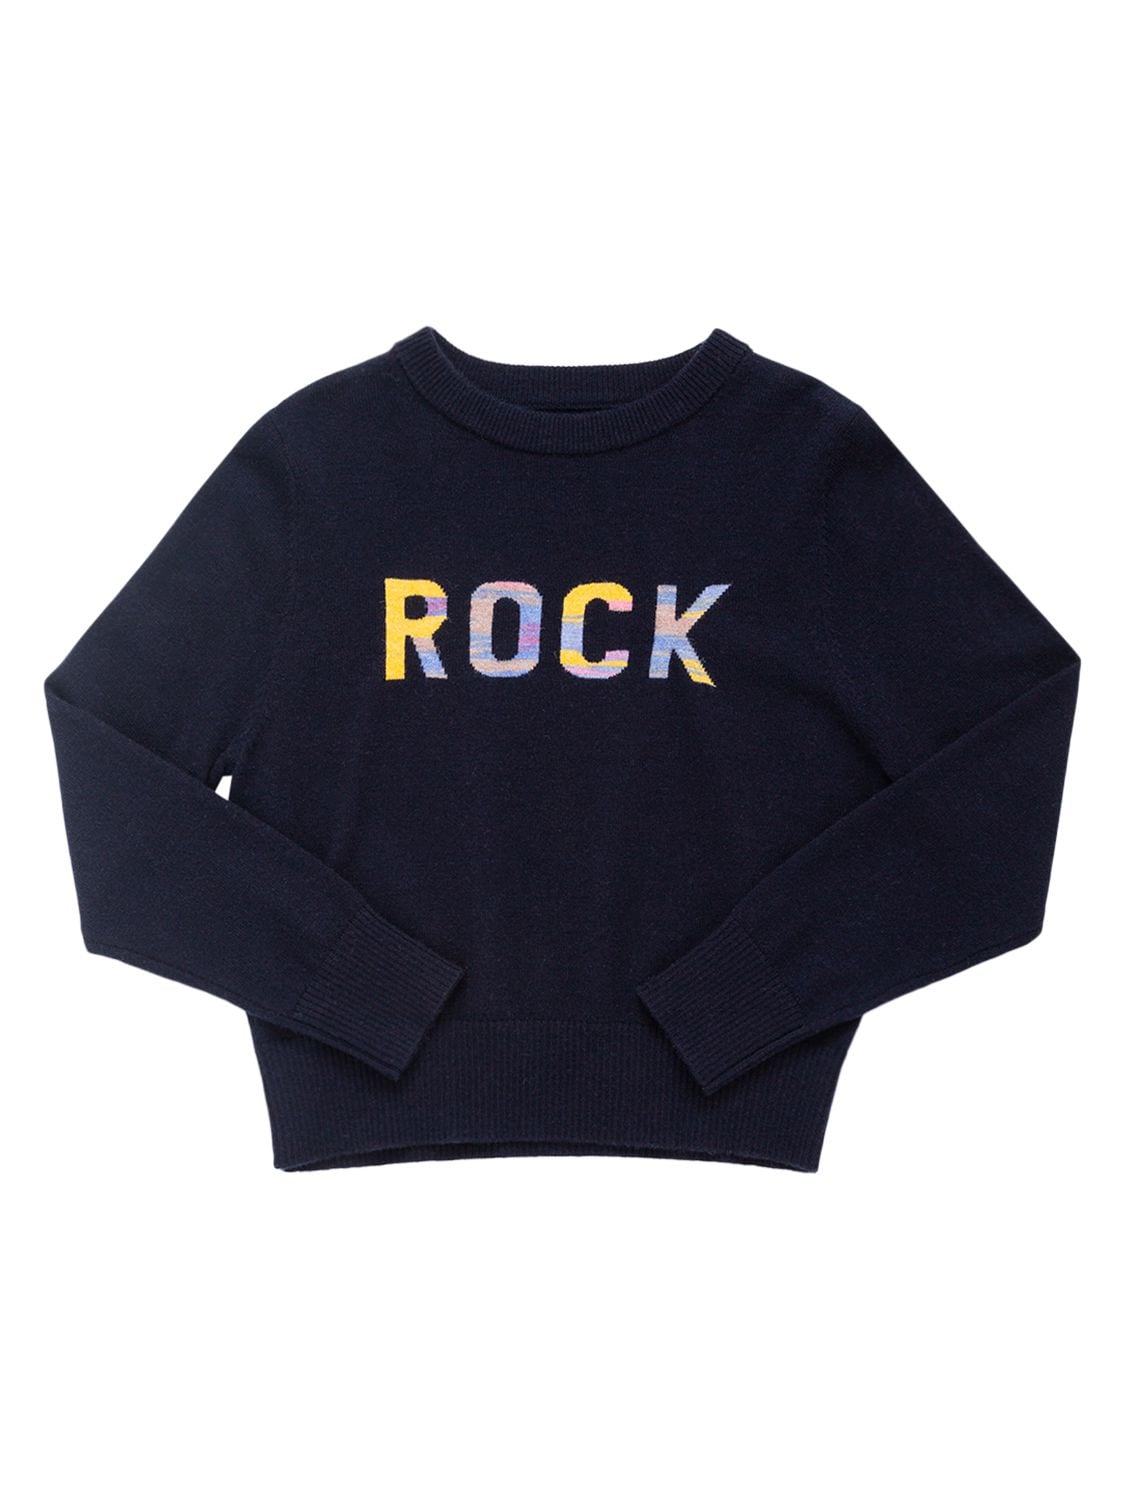 Zadig & Voltaire Kids' Jacquard Knit Recycled Wool Jumper In Navy